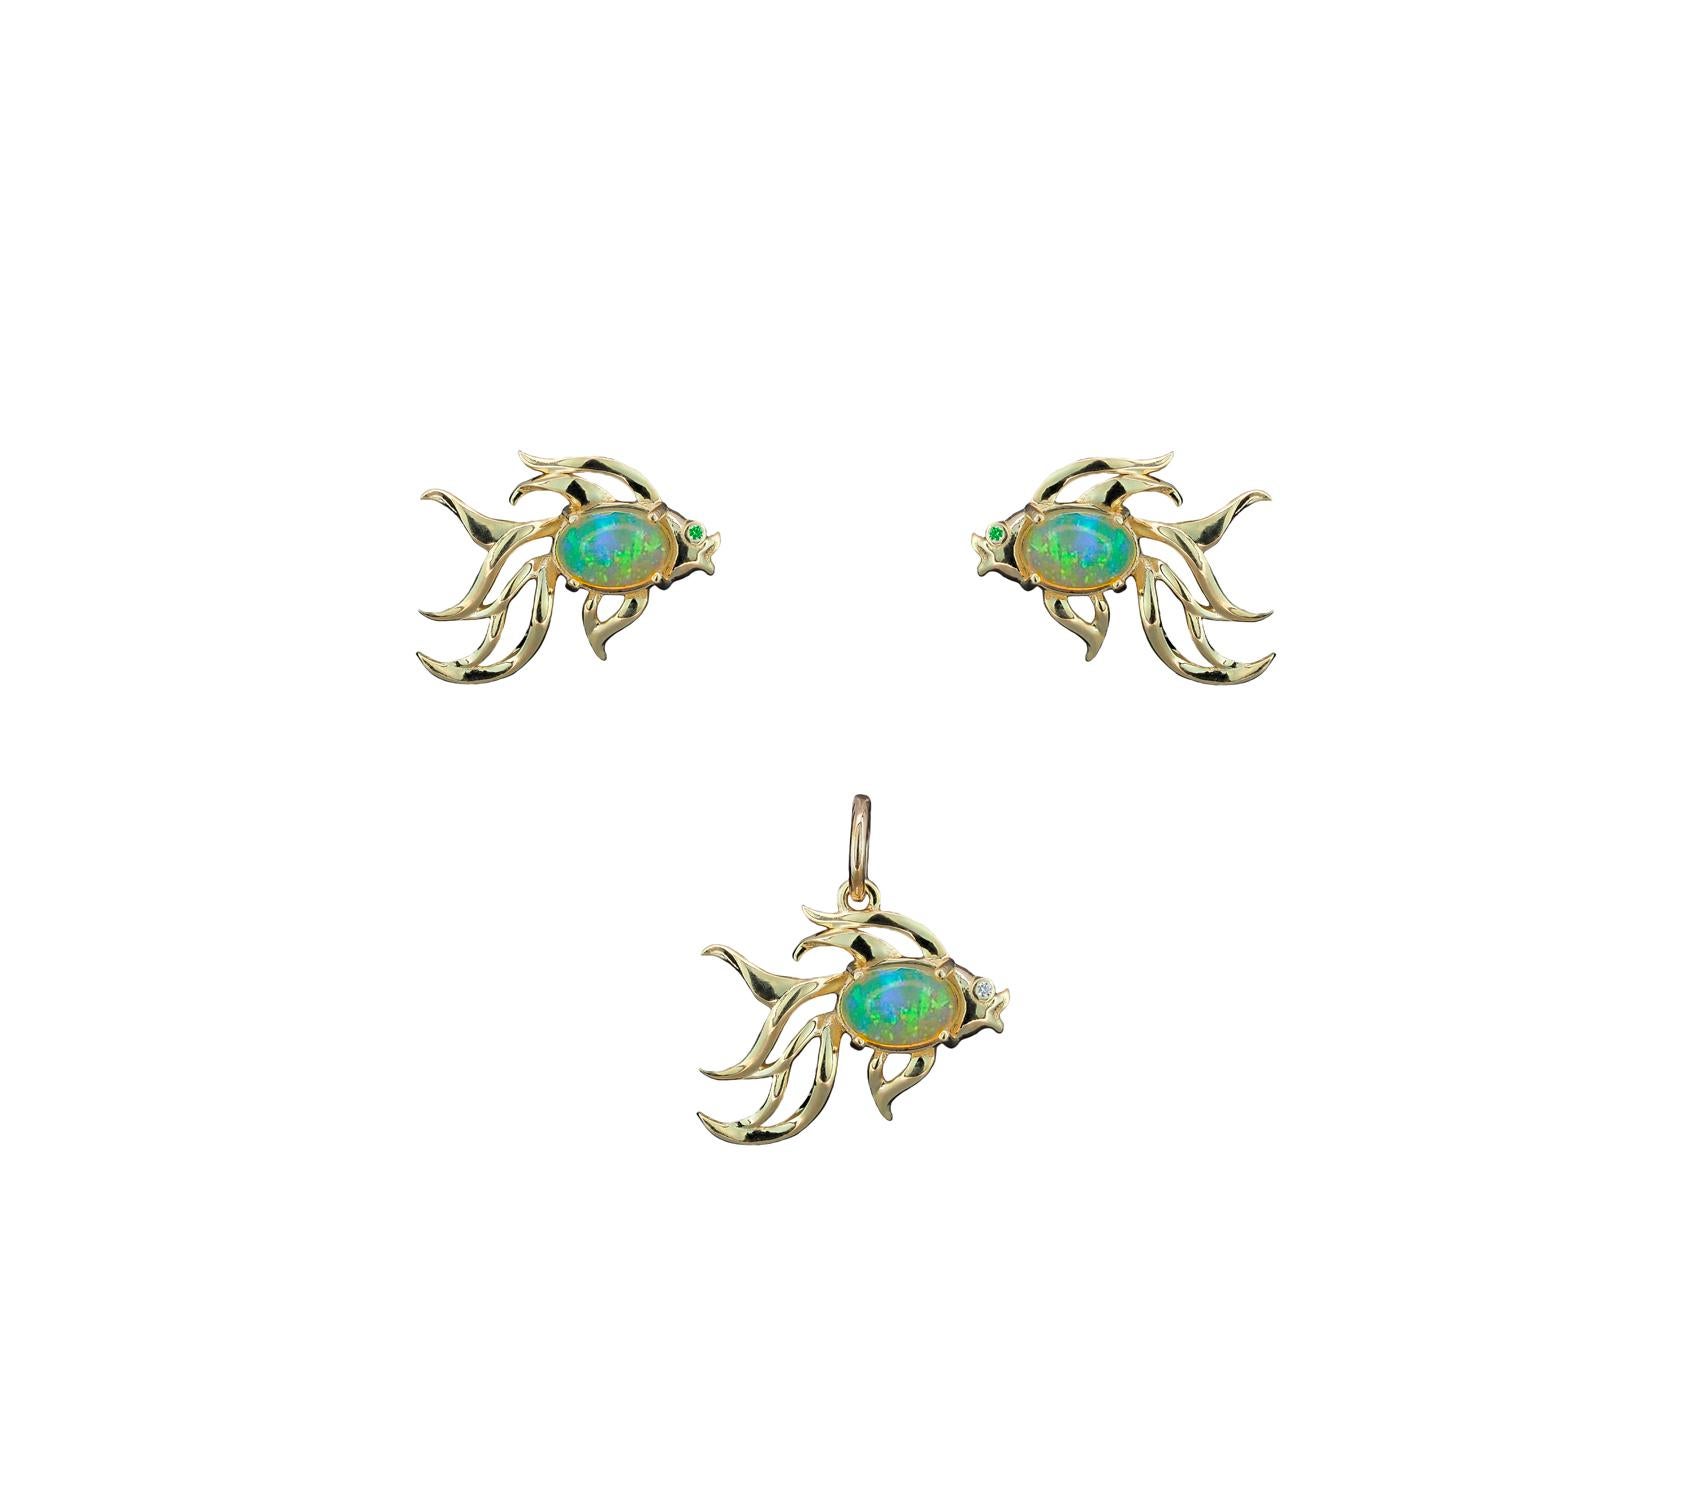 14k gold Fish pendant and earrings set in 14k gold. 14k Gold Fish pendant and earrings studs. Animal Little Fish Jewelry. October Birthstone Opal Lucky fish Gift.

Earrings and pendant set:
Metal: 14k gold
Size: 18x16mm and same for earrings
Total